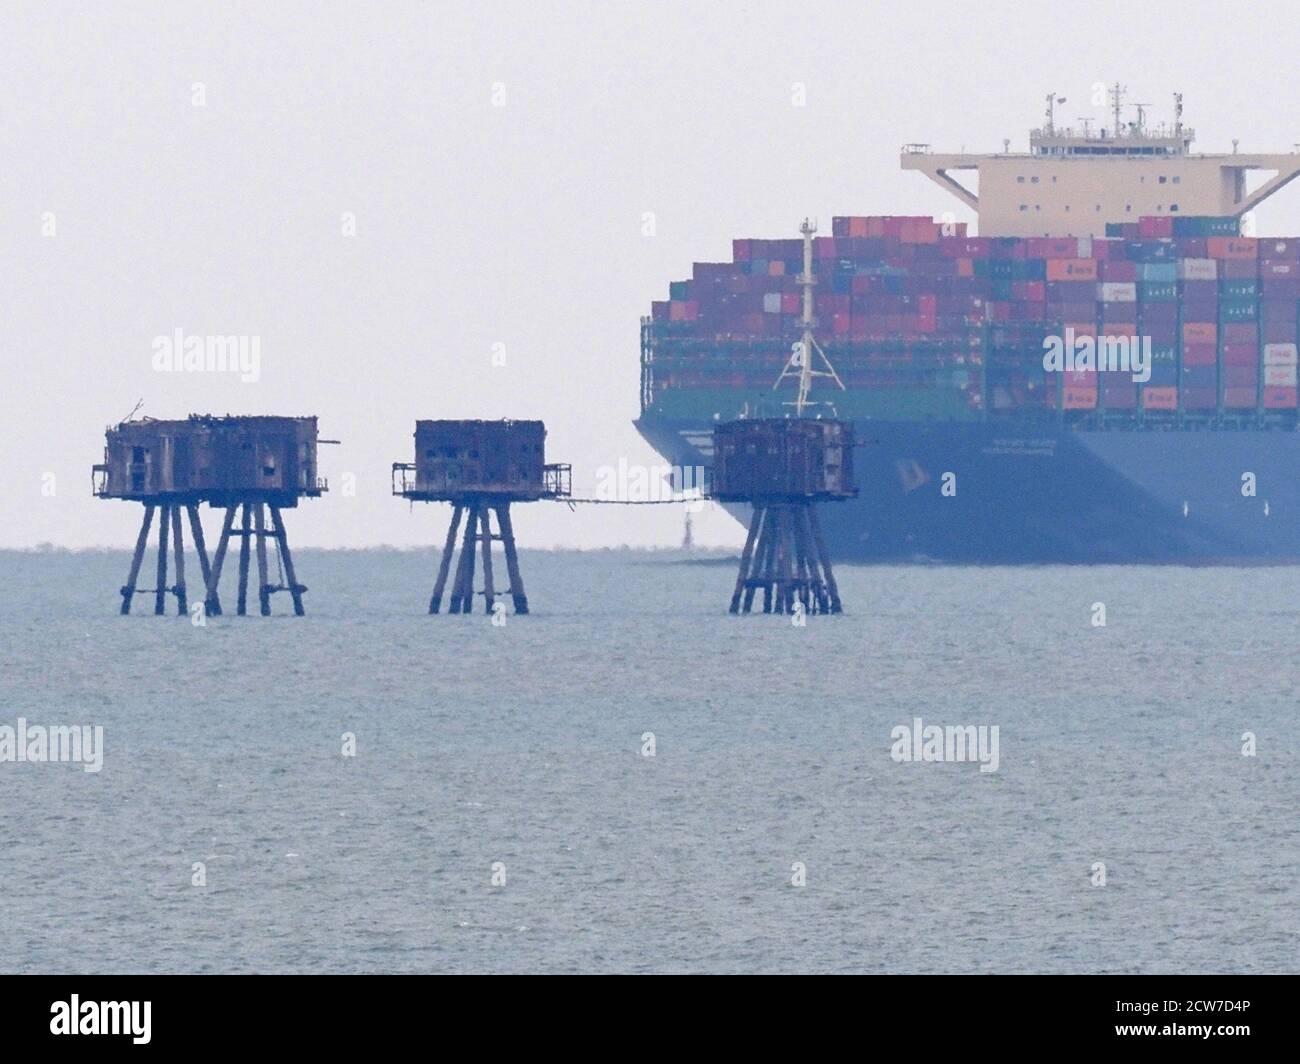 Warden, Kent, UK. 28th September, 2020. One of the world's largest container ships HMM Southampton seen passing the Red Sands Towers in the Thames Estuary from Warden, Kent at lunchtime. Credit: James Bell/Alamy Live News Stock Photo